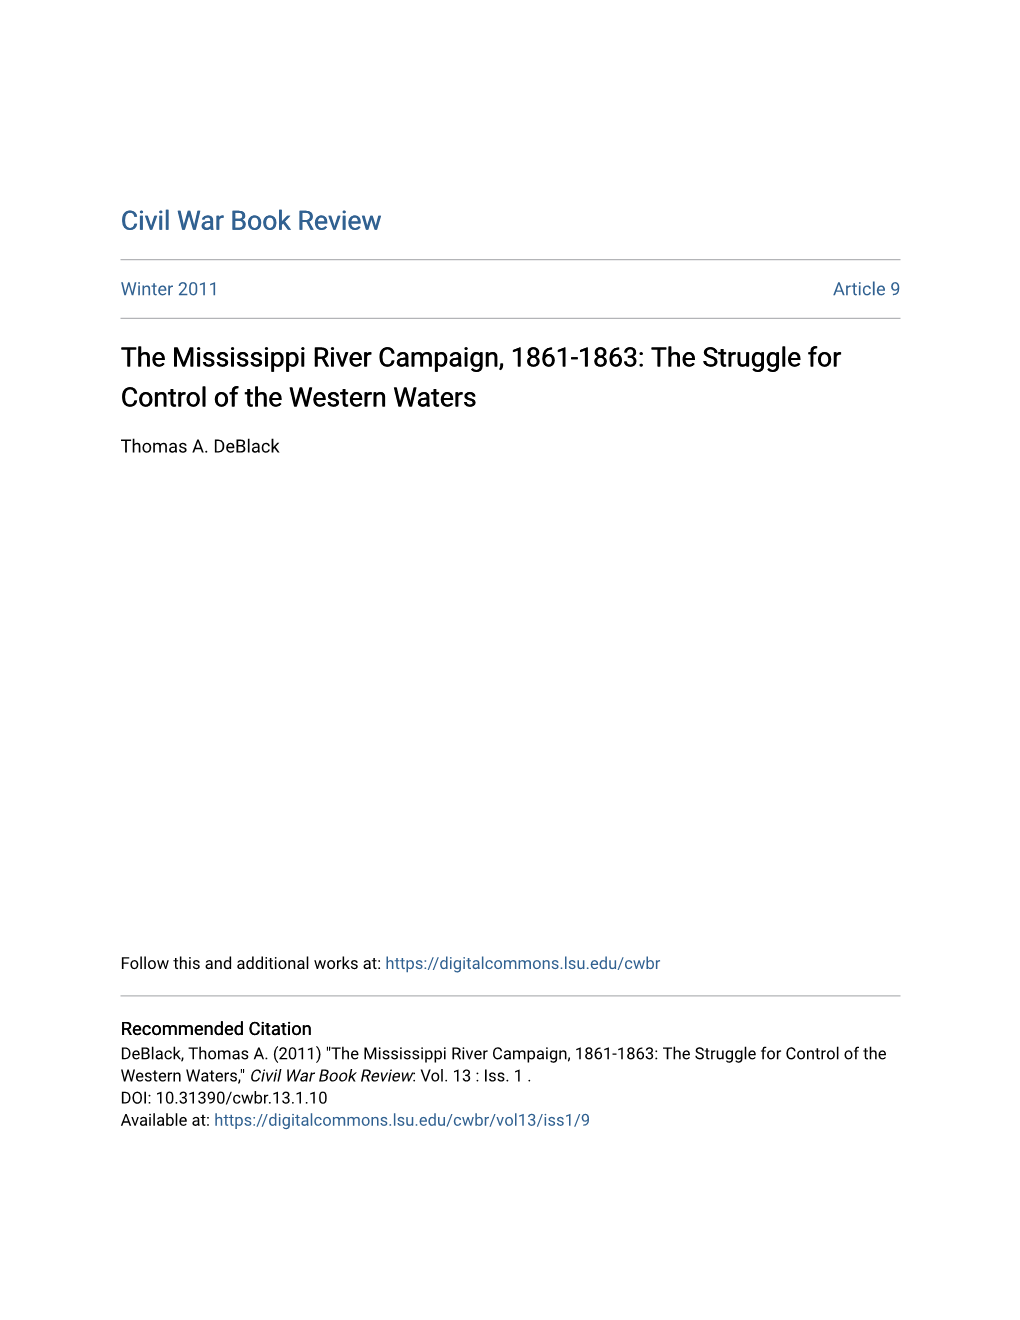 The Mississippi River Campaign, 1861-1863: the Struggle for Control of the Western Waters